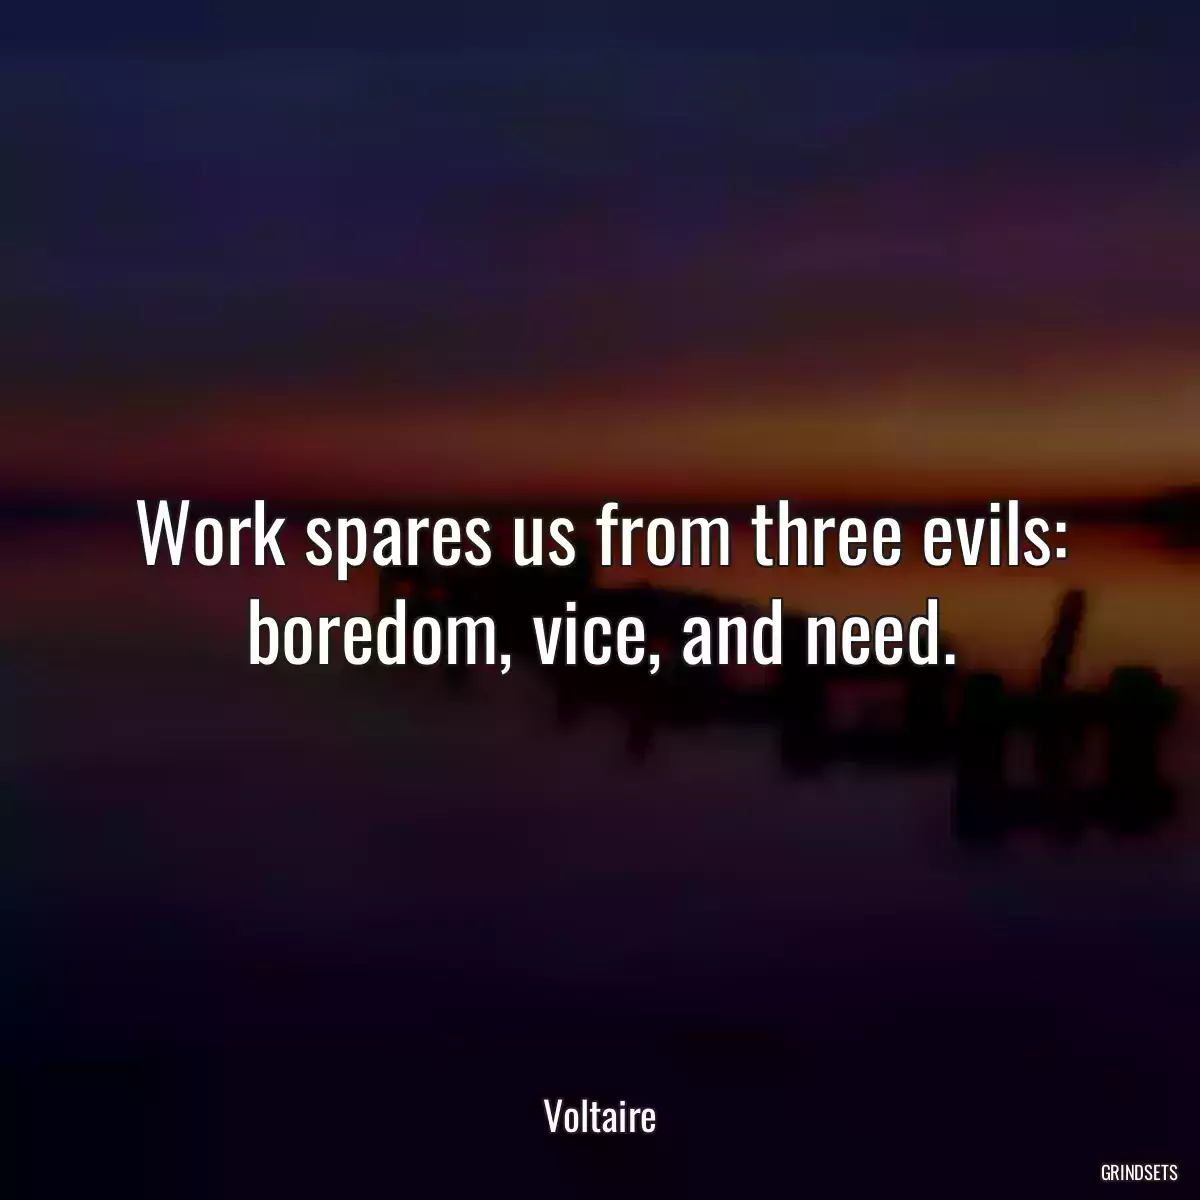 Work spares us from three evils: boredom, vice, and need.